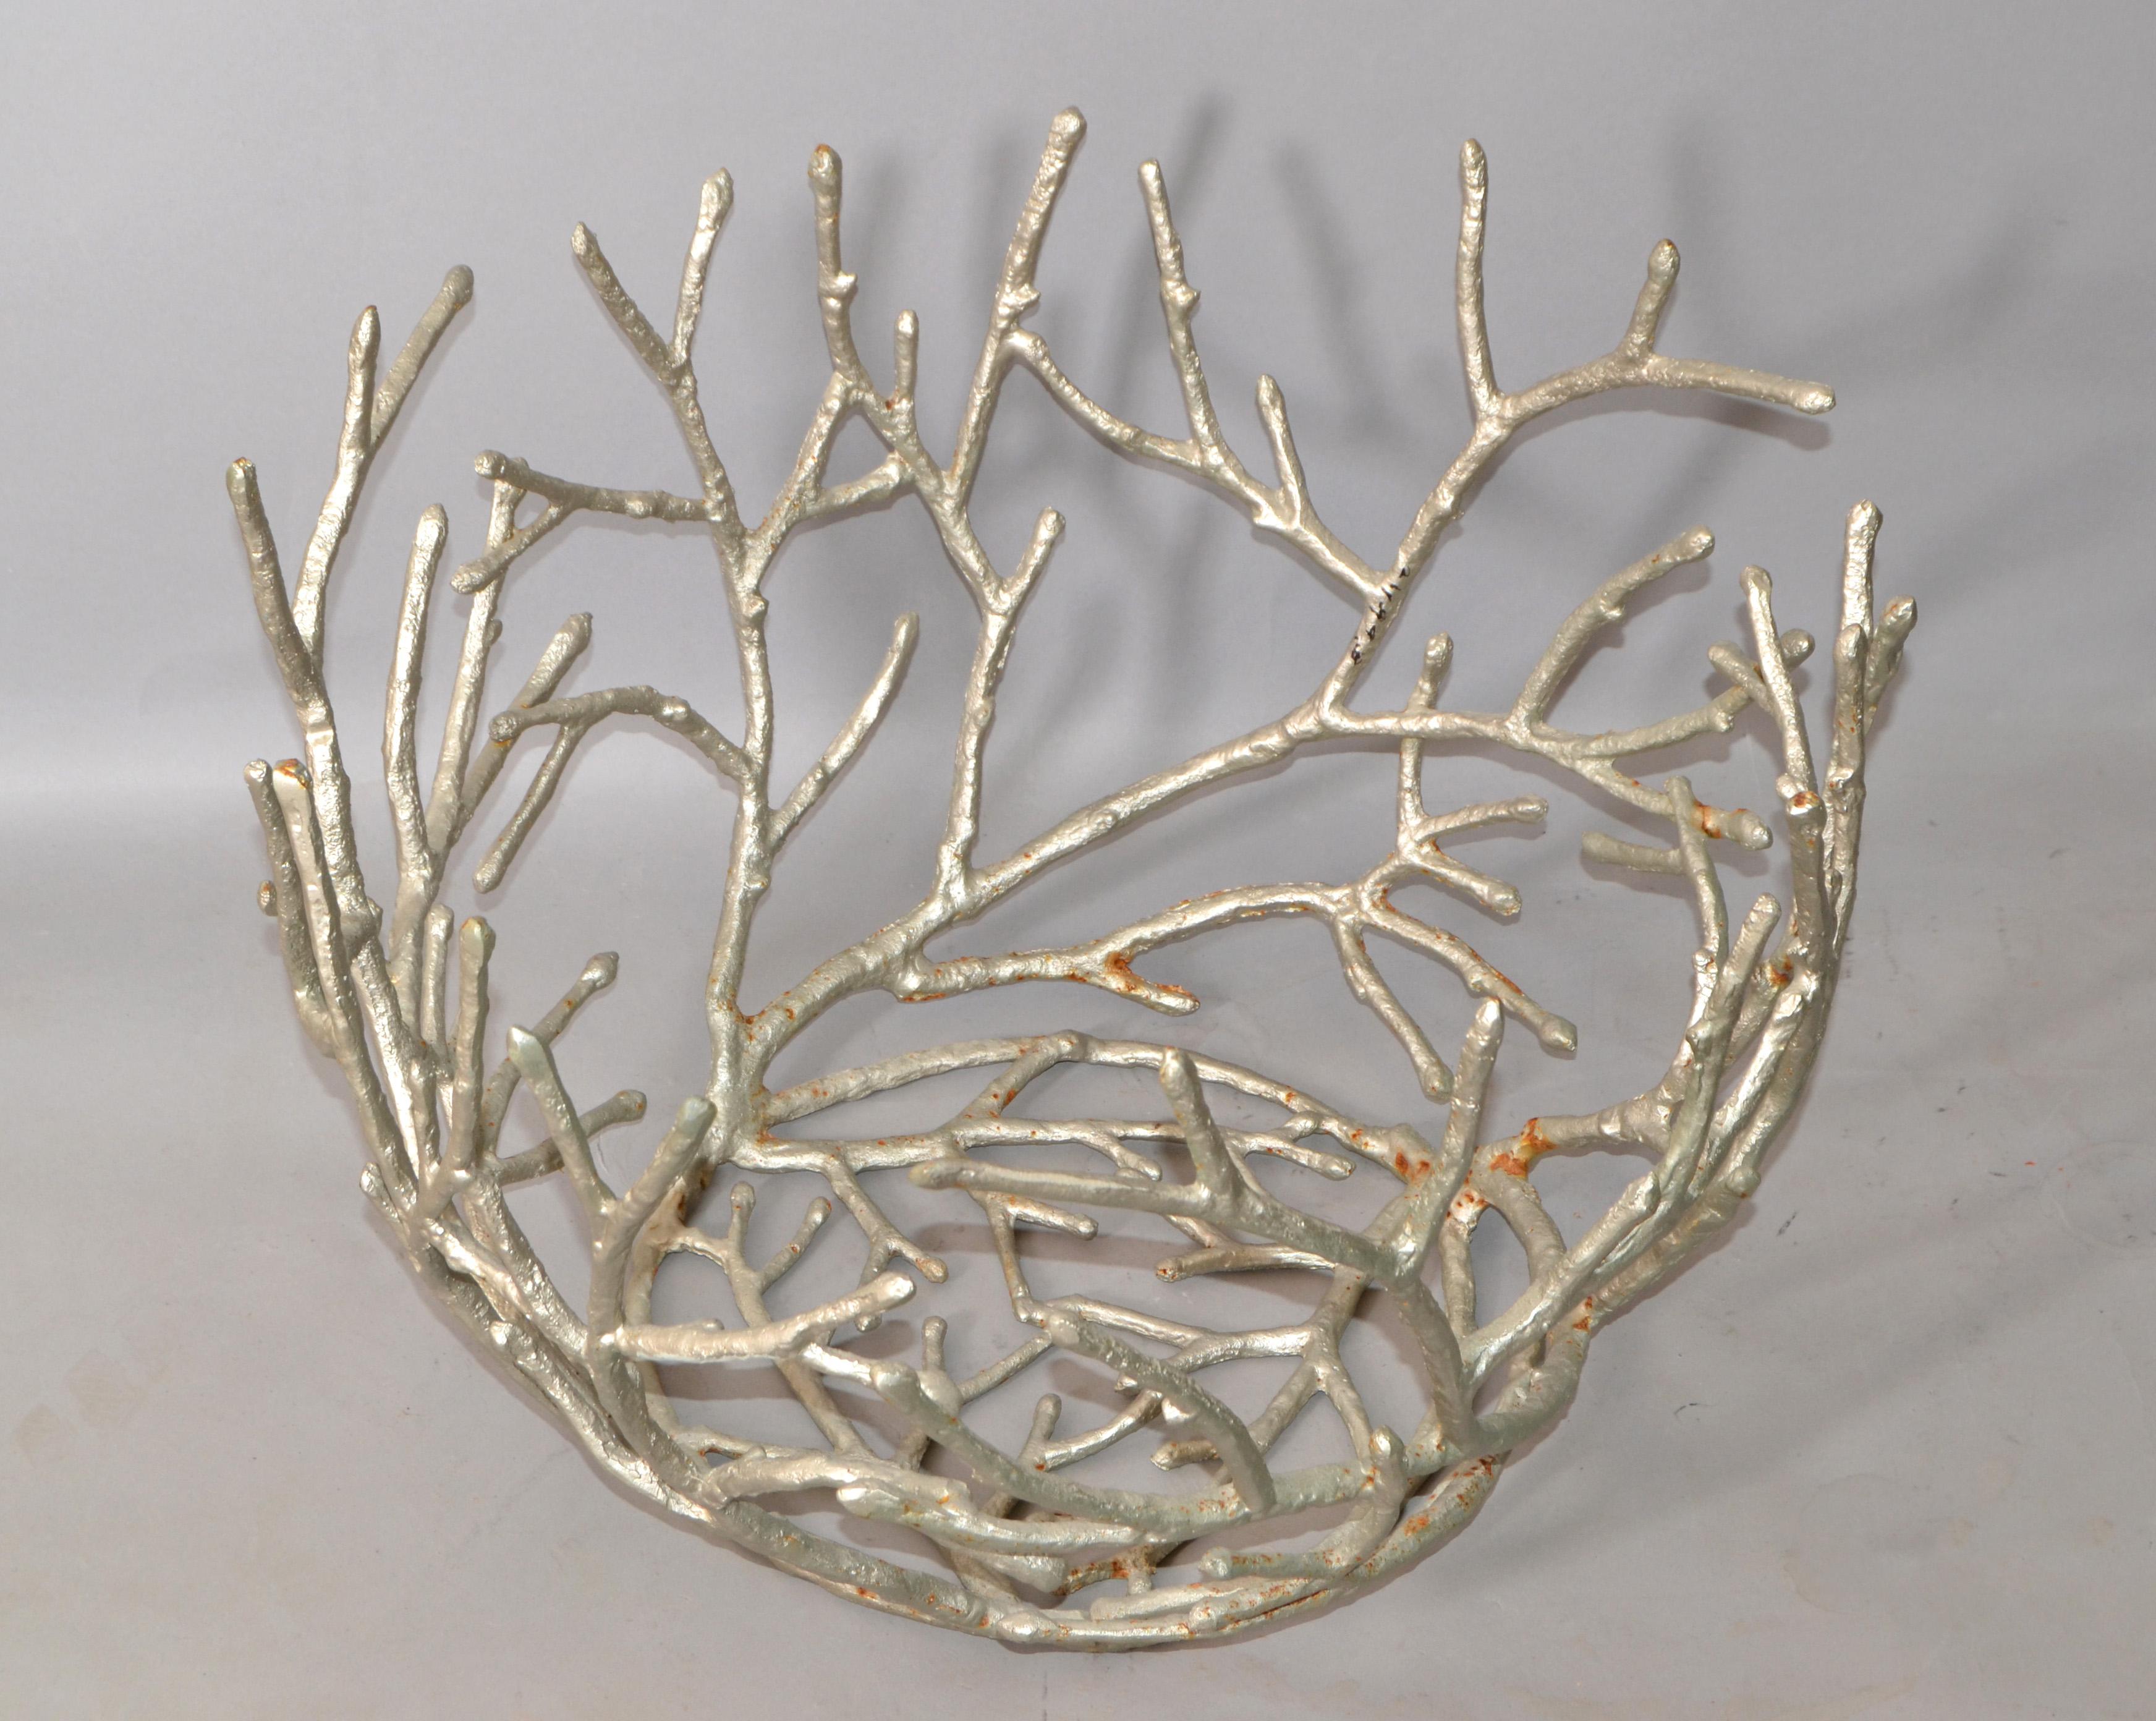 1970s, Sculptural Organic Coral Shaped Distressed Silver Finish Aluminum Planter For Sale 7